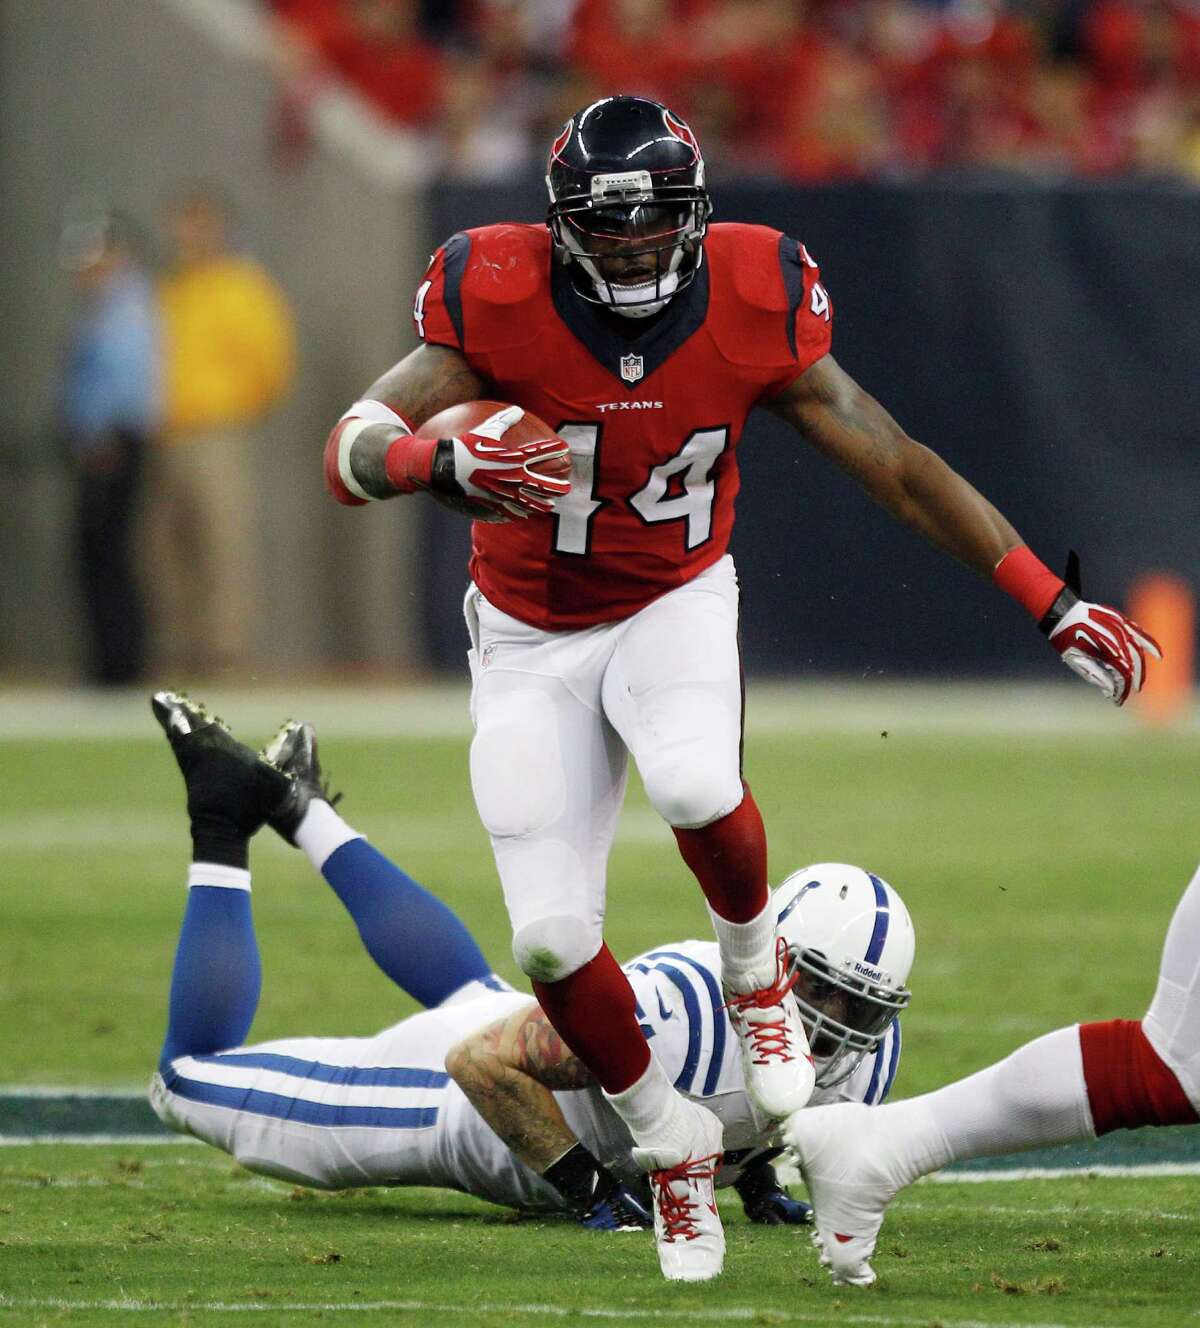 Four cracked ribs didn't keep Texans running back Ben Tate (44) from going right at the Colts on Sunday night. He carried 22 times for 81 yards.